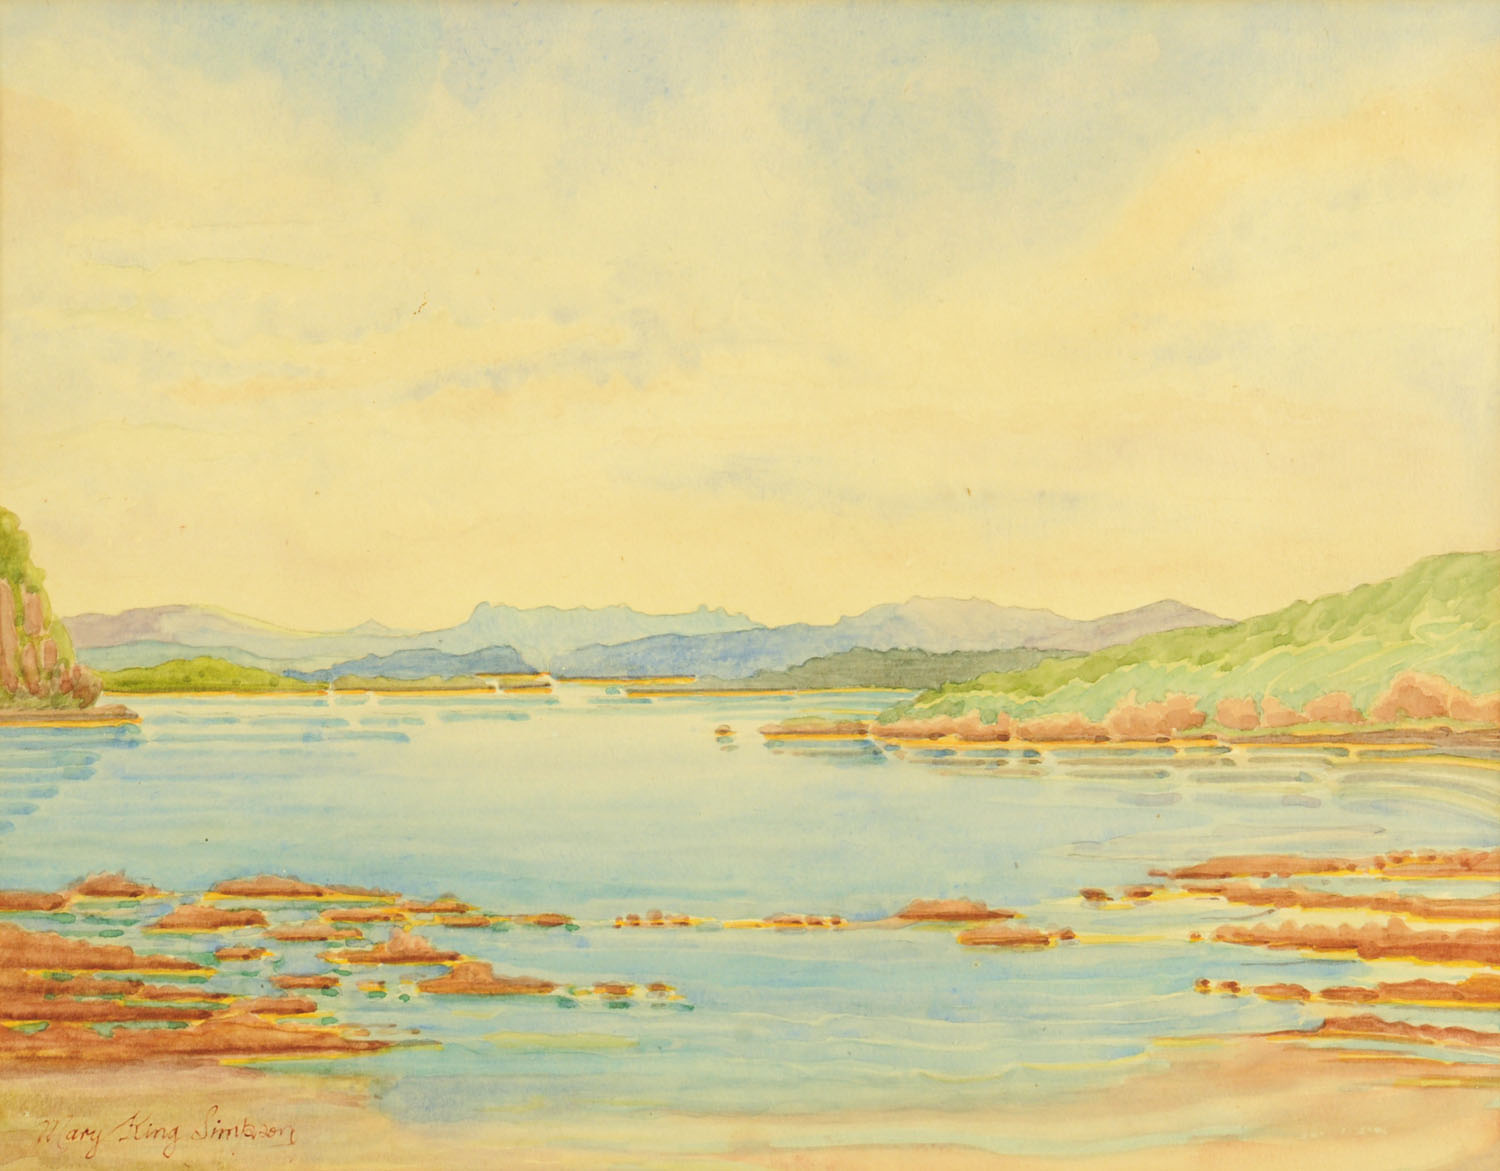 Mary King Simpson, watercolour, "Mother of Pearl Morning, Skye". 28 cm x 36 cm.